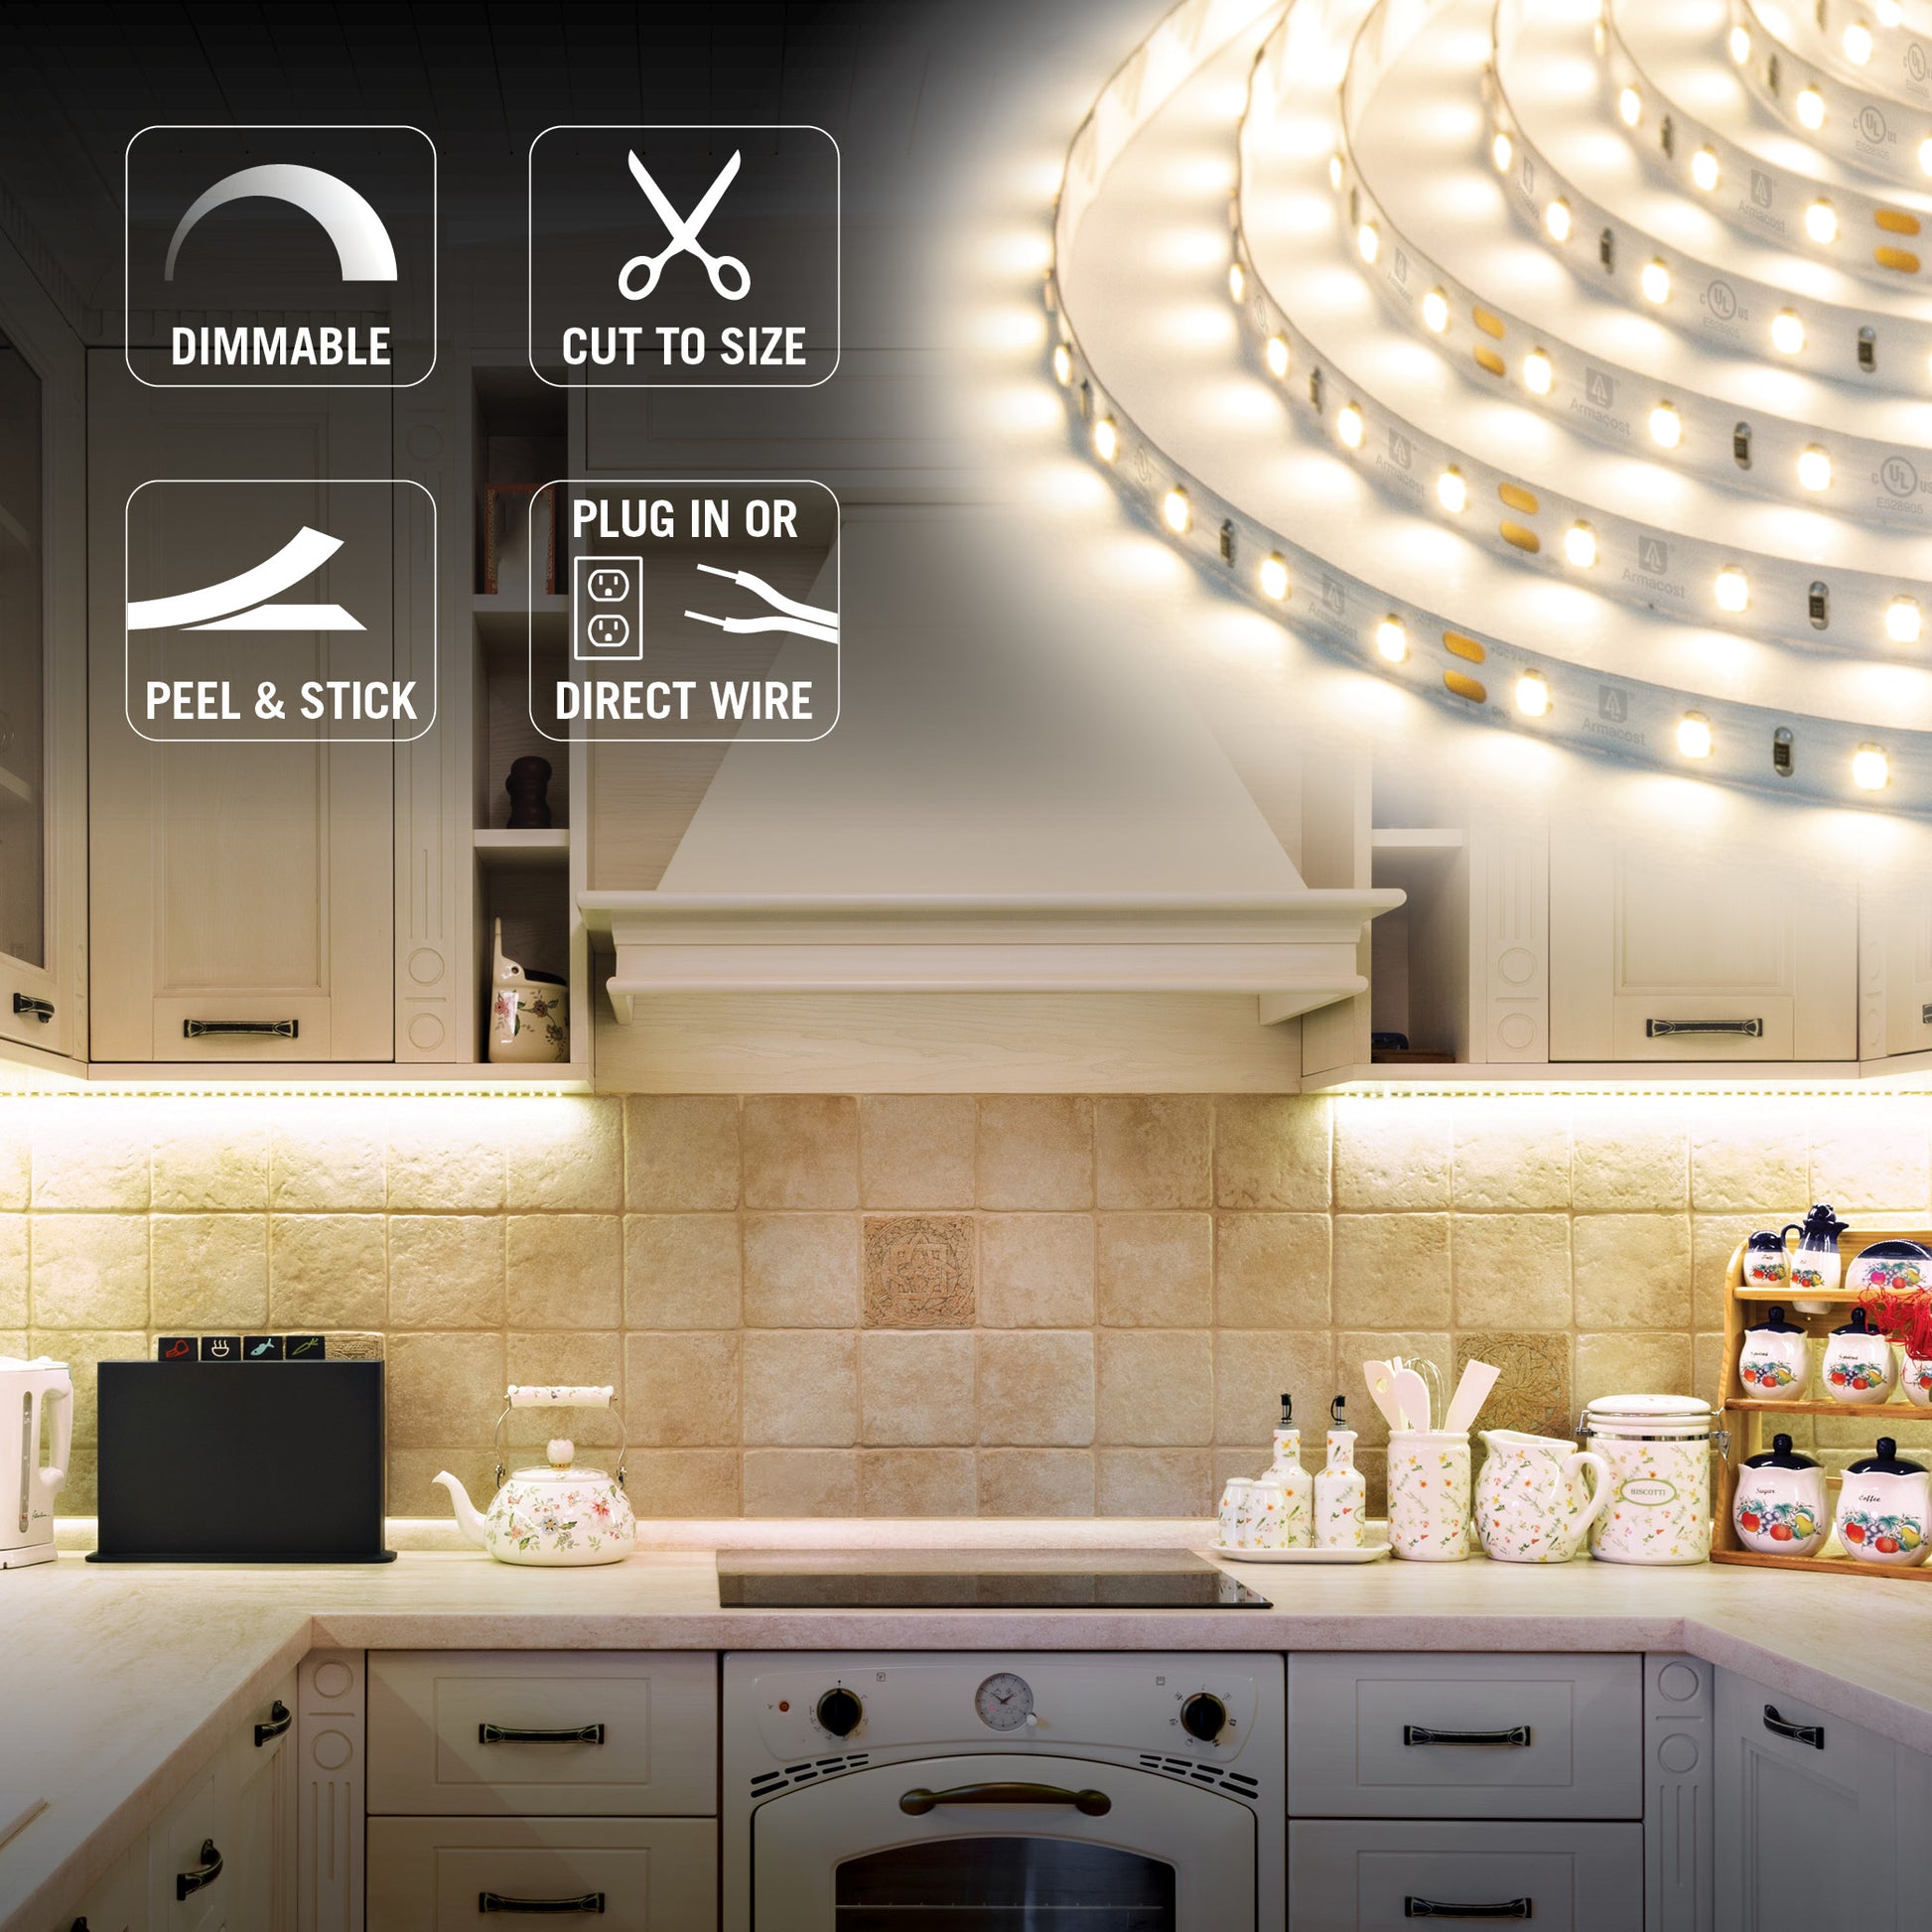 LED Strips 5 metres, Dimmable